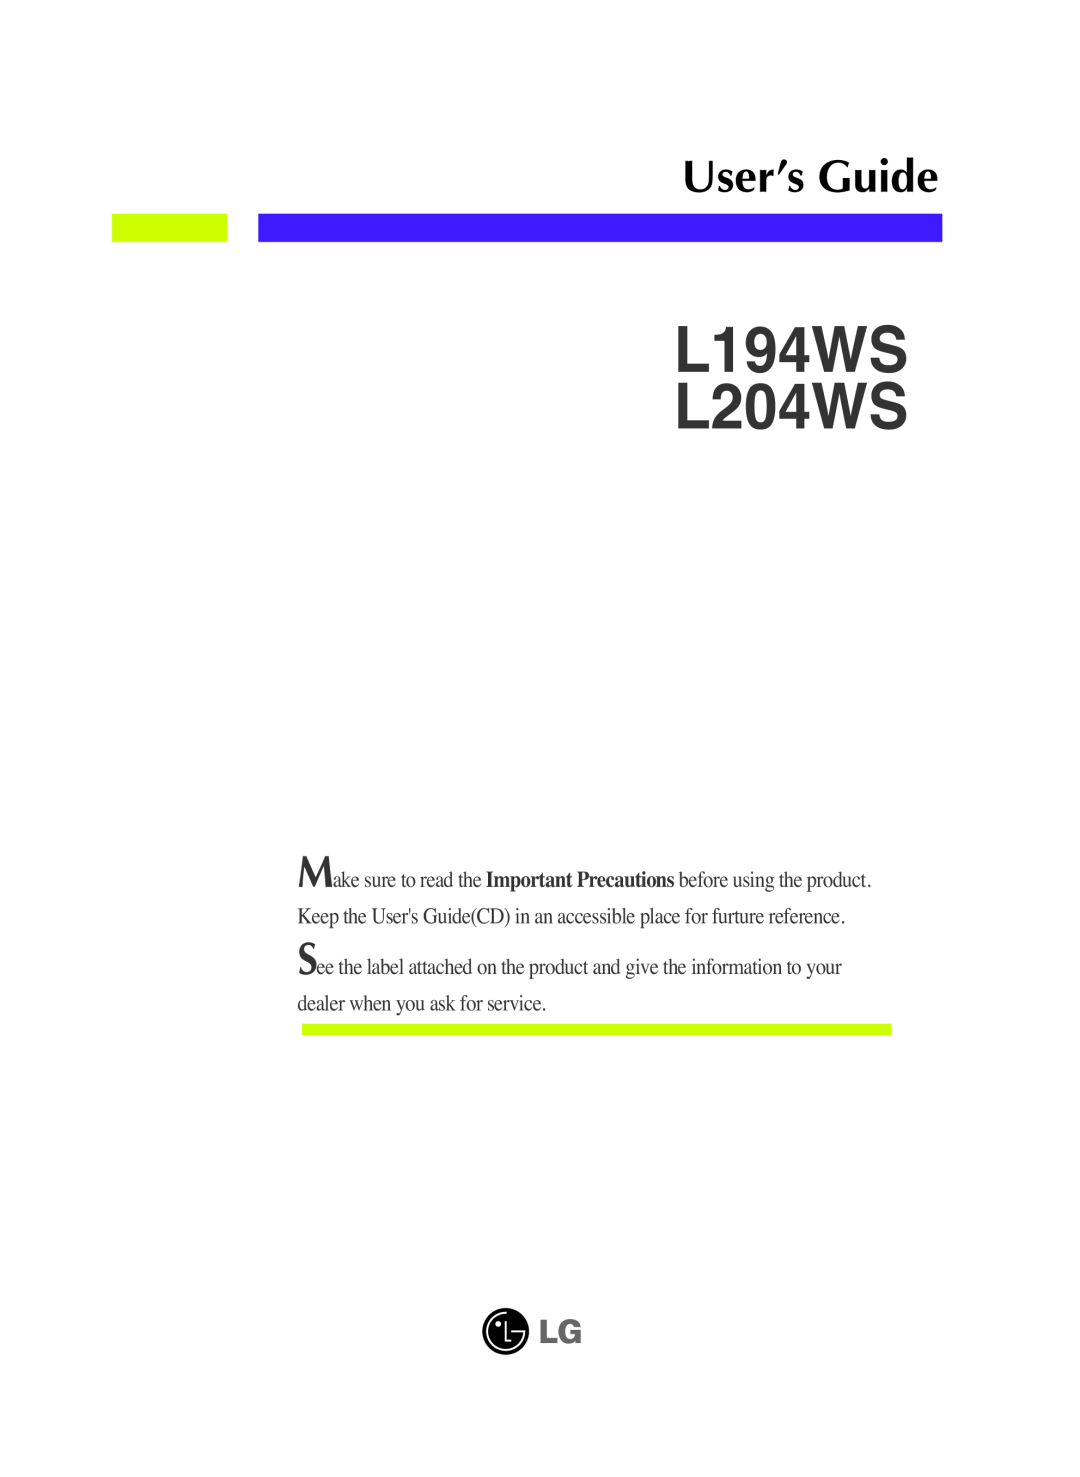 LG Electronics manual L194WS L204WS, User’s Guide 